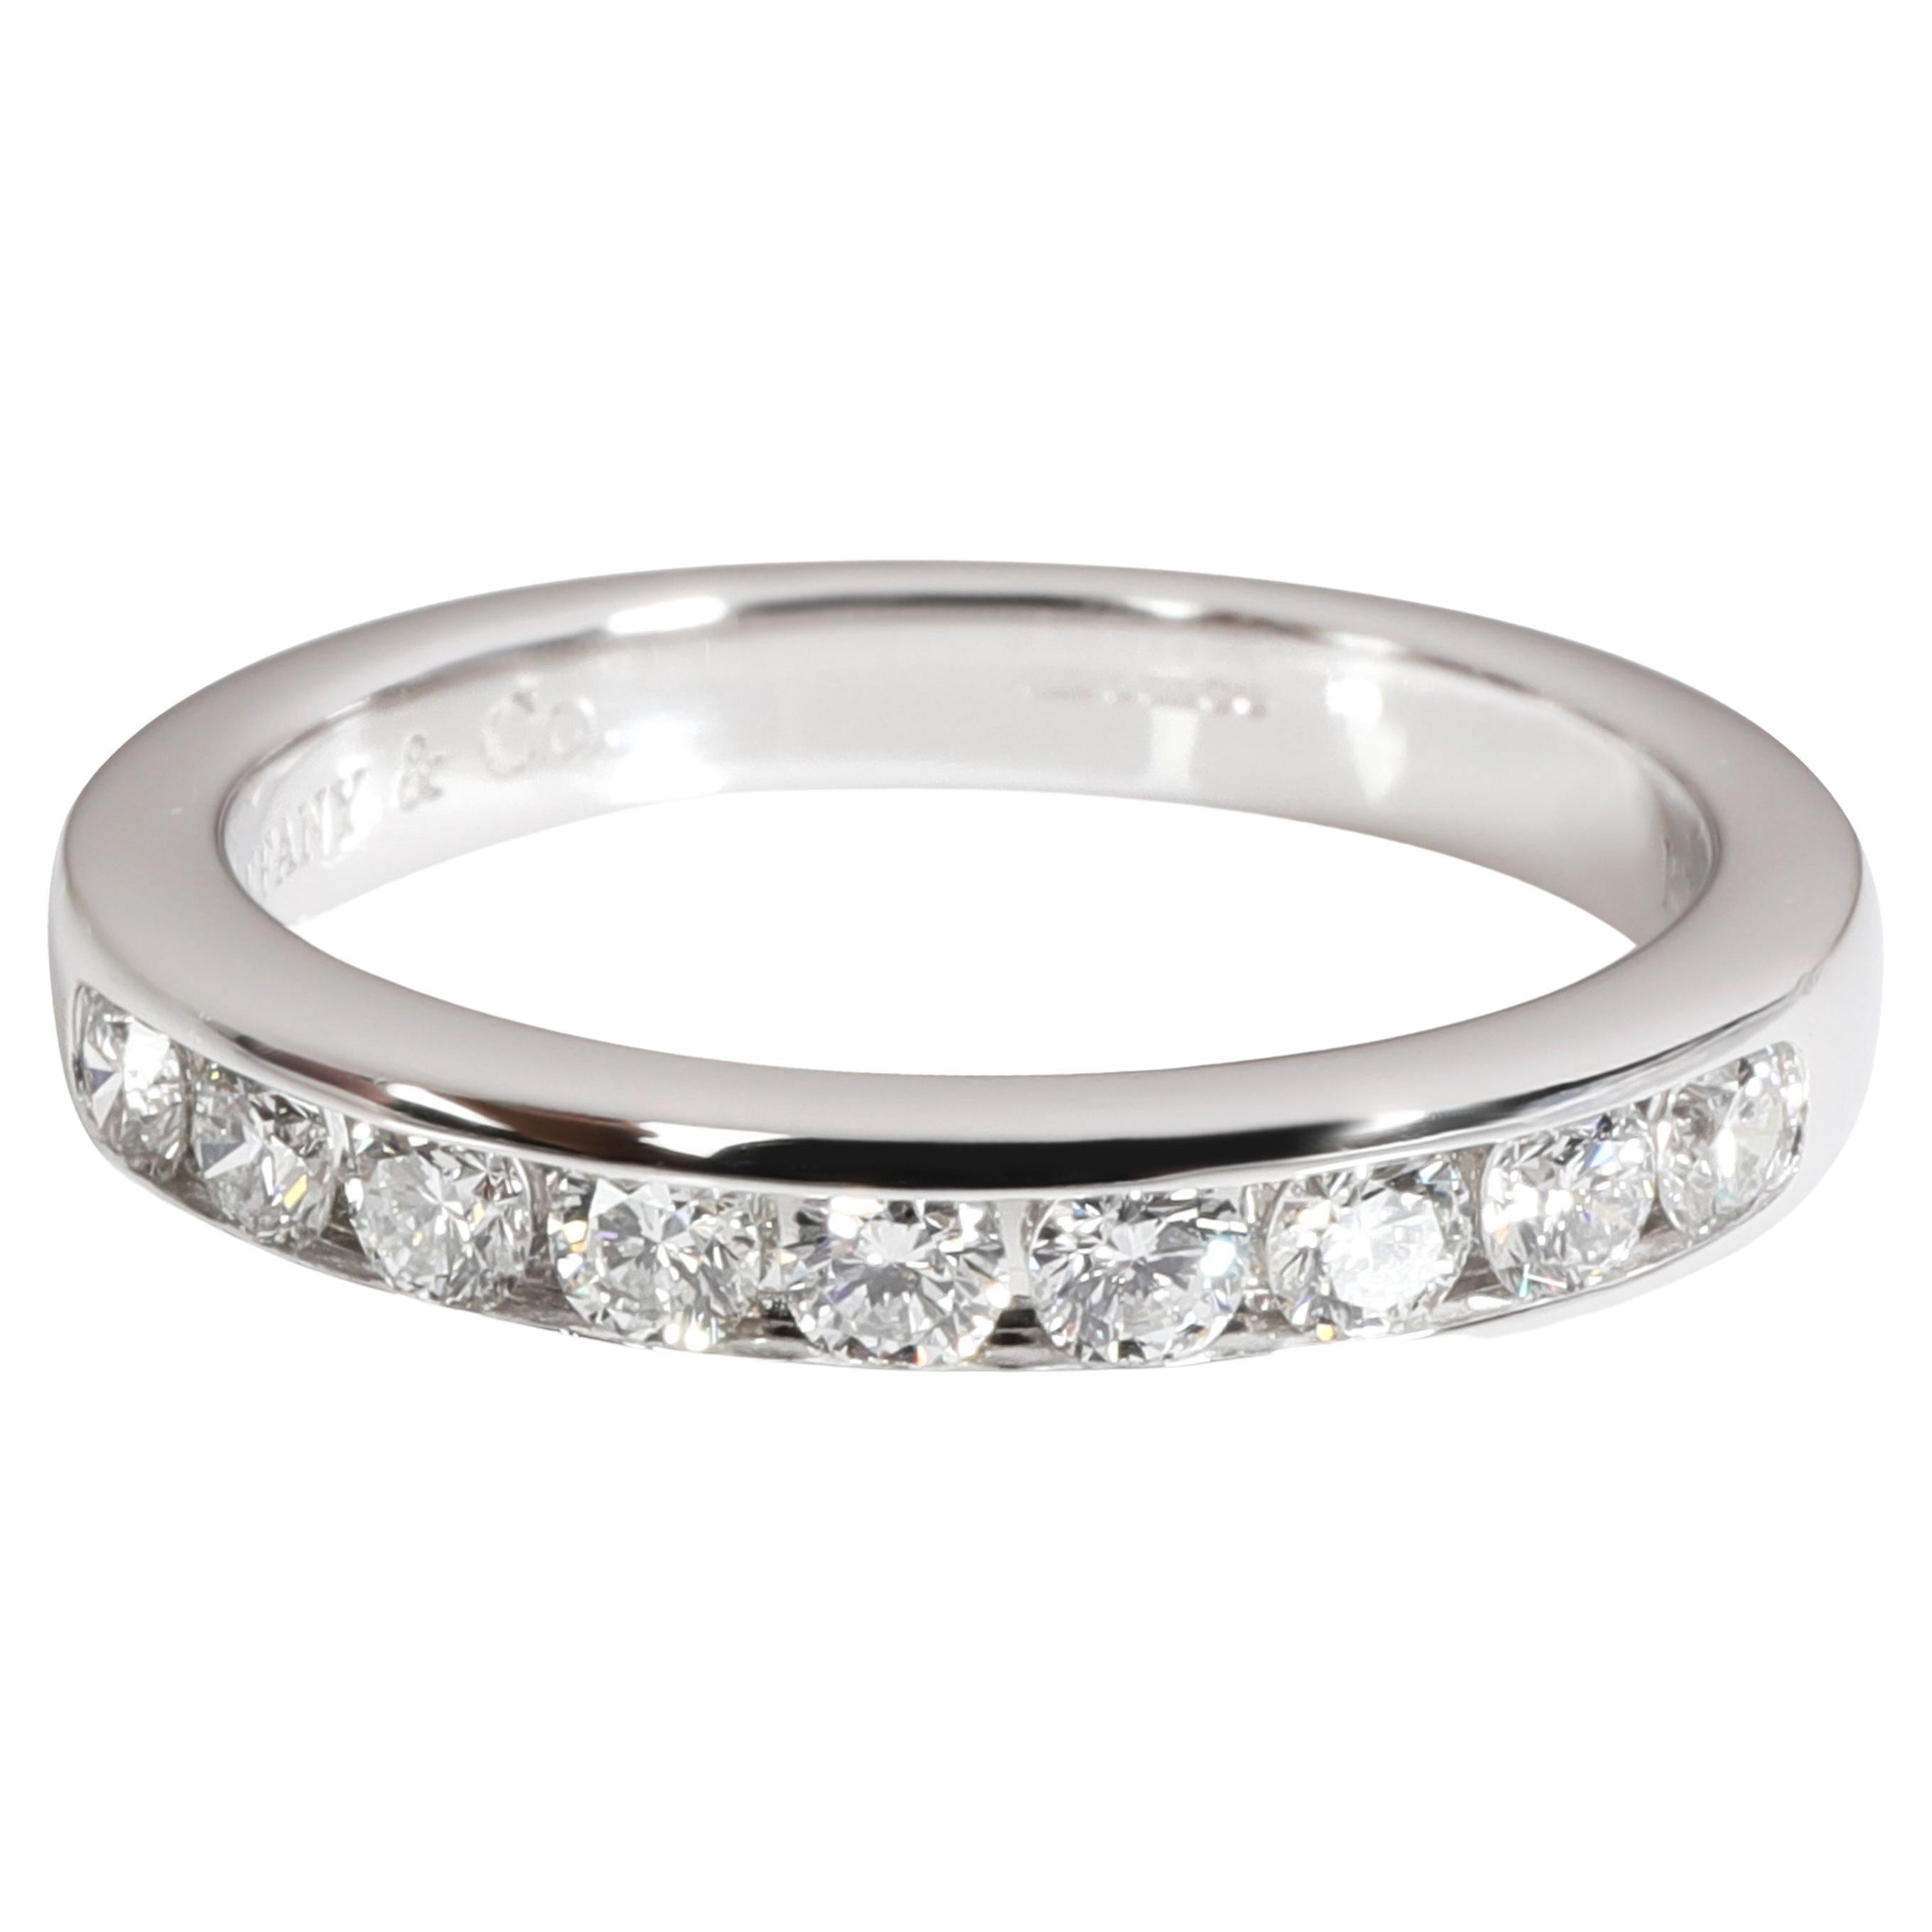 Tiffany & Co. Channel Set Diamond Wedding Band in Platinum 0.35 CTW For Sale